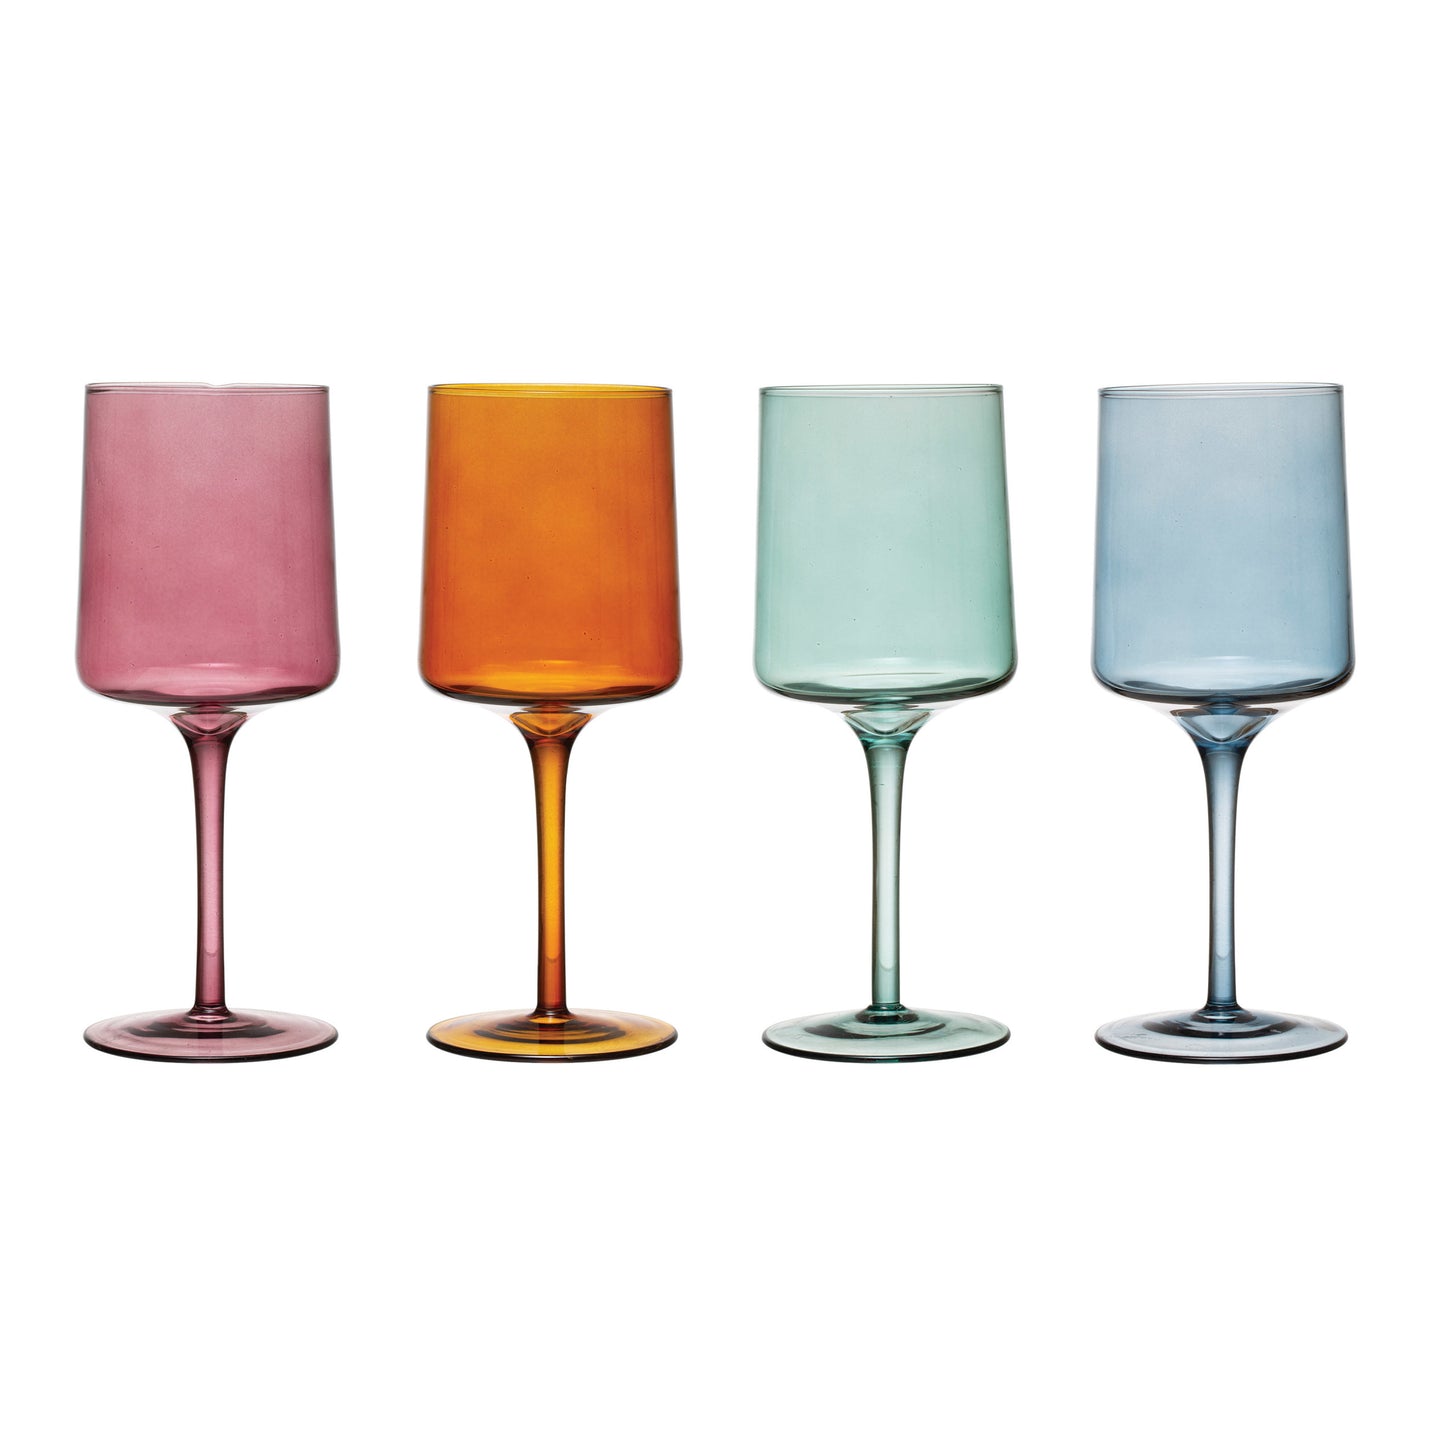 14 oz. Stemmed Wine Glass in variety of colors - Shop Wild Ivy